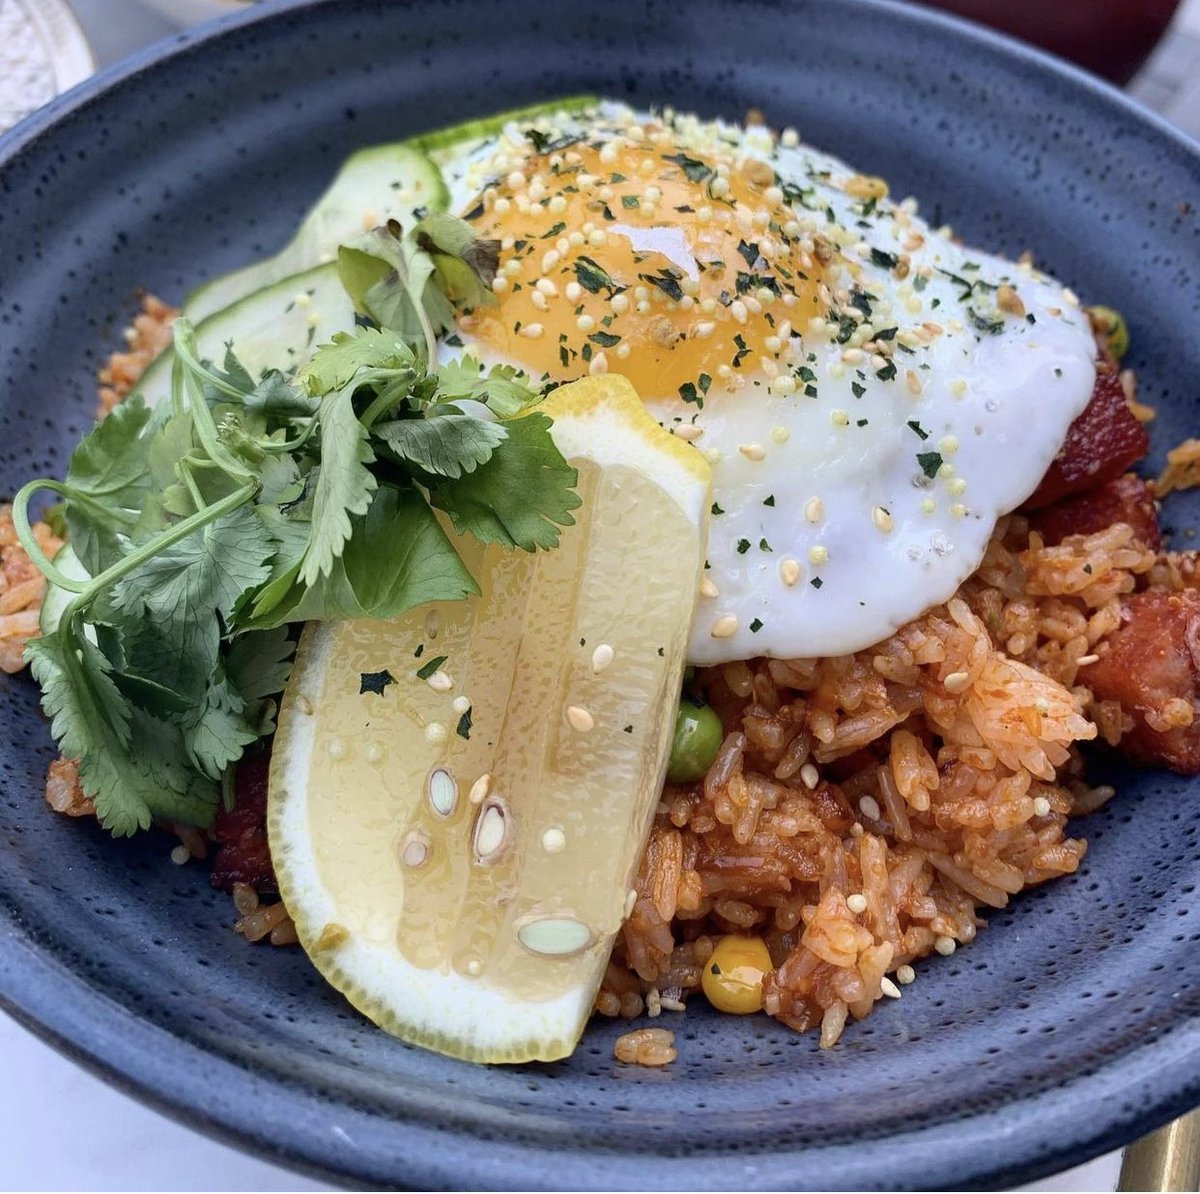 Jackie's Brunch is on Saturday & Sunday 11 to 5!

Dish 4 - BRUNCH FRIED RICE
house-made “spam”, crab fat, pickled cucumber, fried egg

#DCbrunch #districtfoodies #dcfoodie #brunch #brunchtime #dmvfoodie #districtdining #dcfoodsters #eatsdc #edibledc #brunchindc #spam